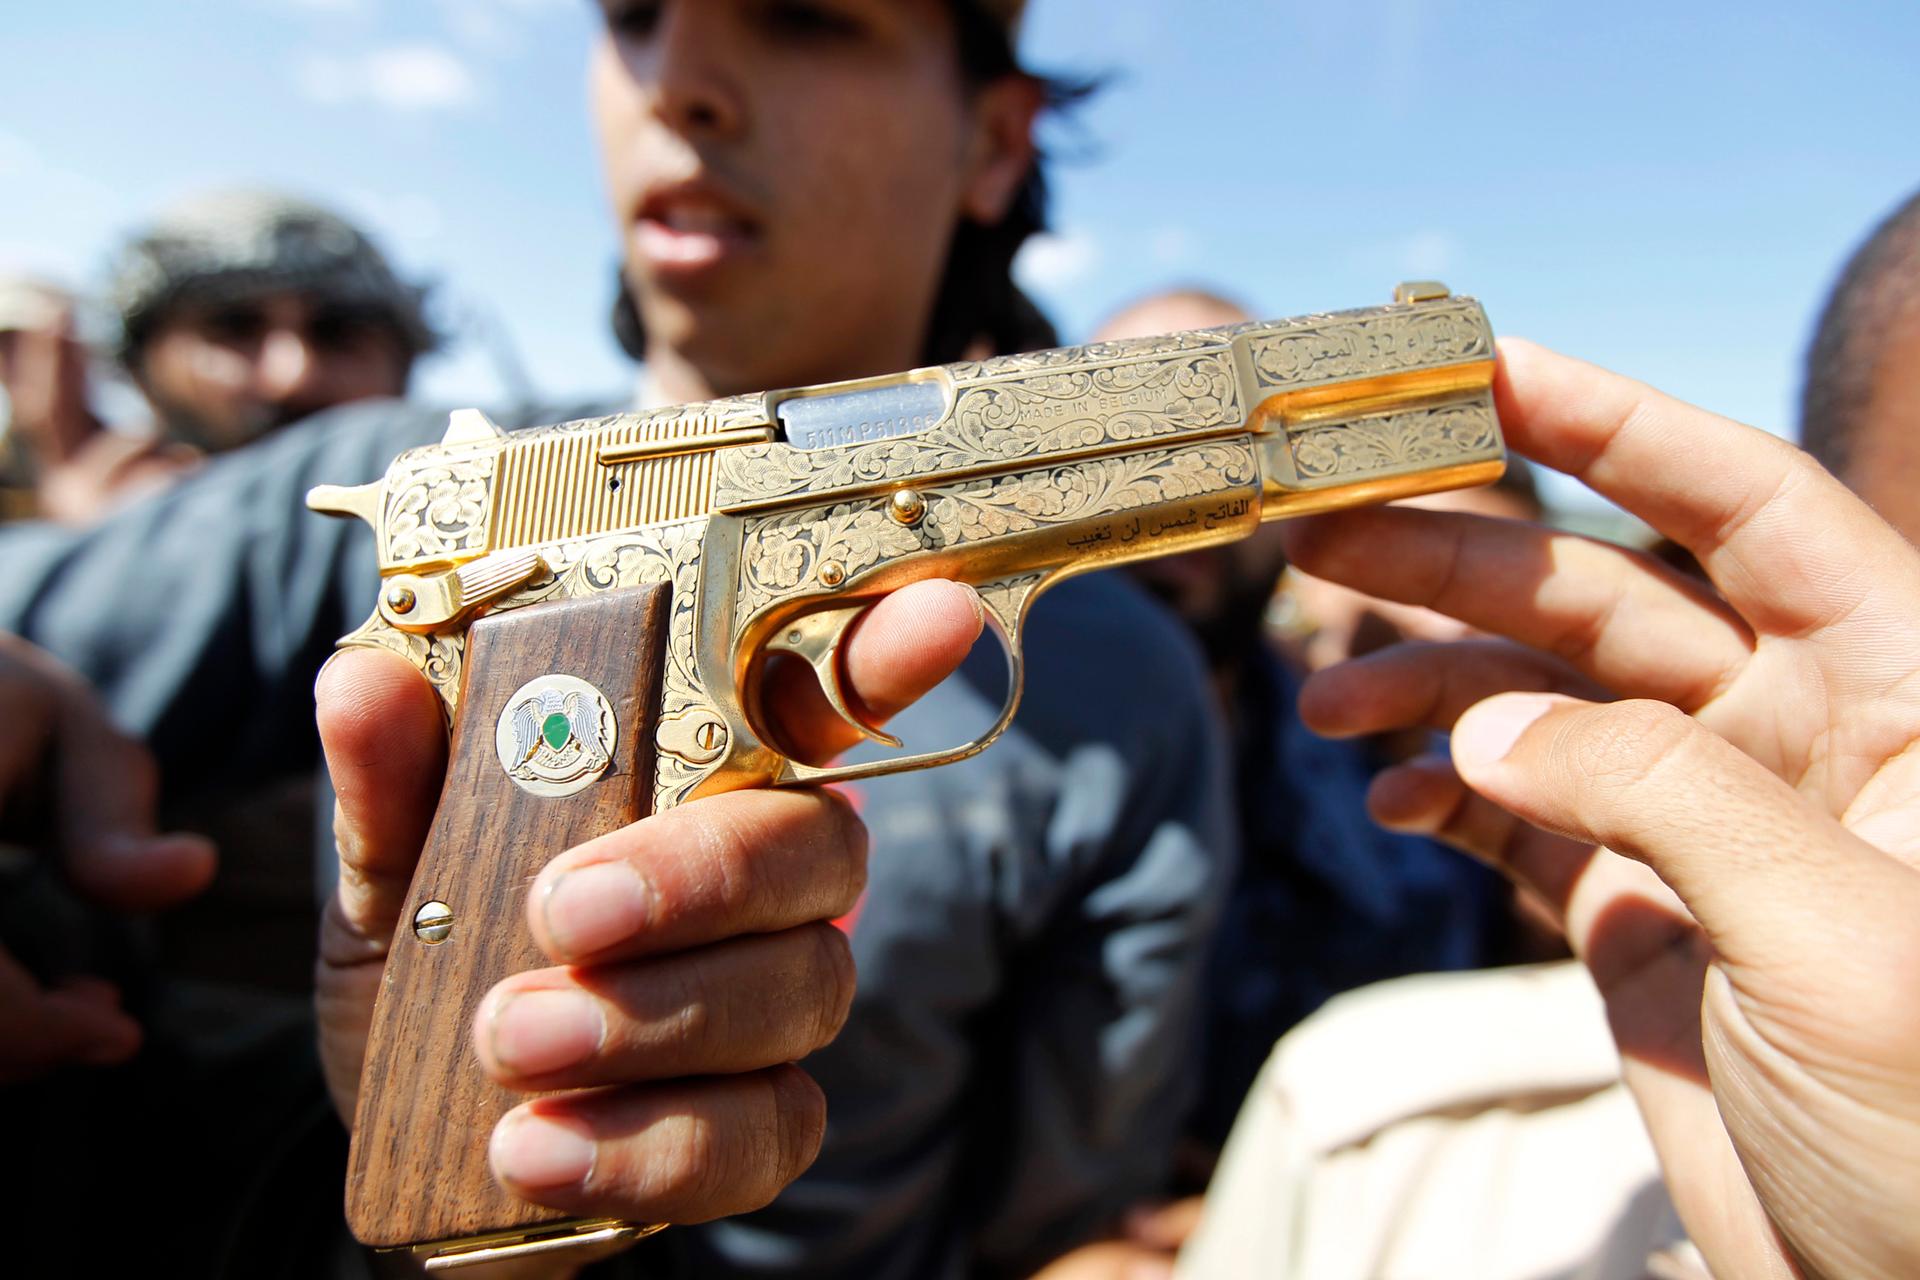 The gold plated pistol soon after it was seized by anti-Gadaffi rebels near Sirte